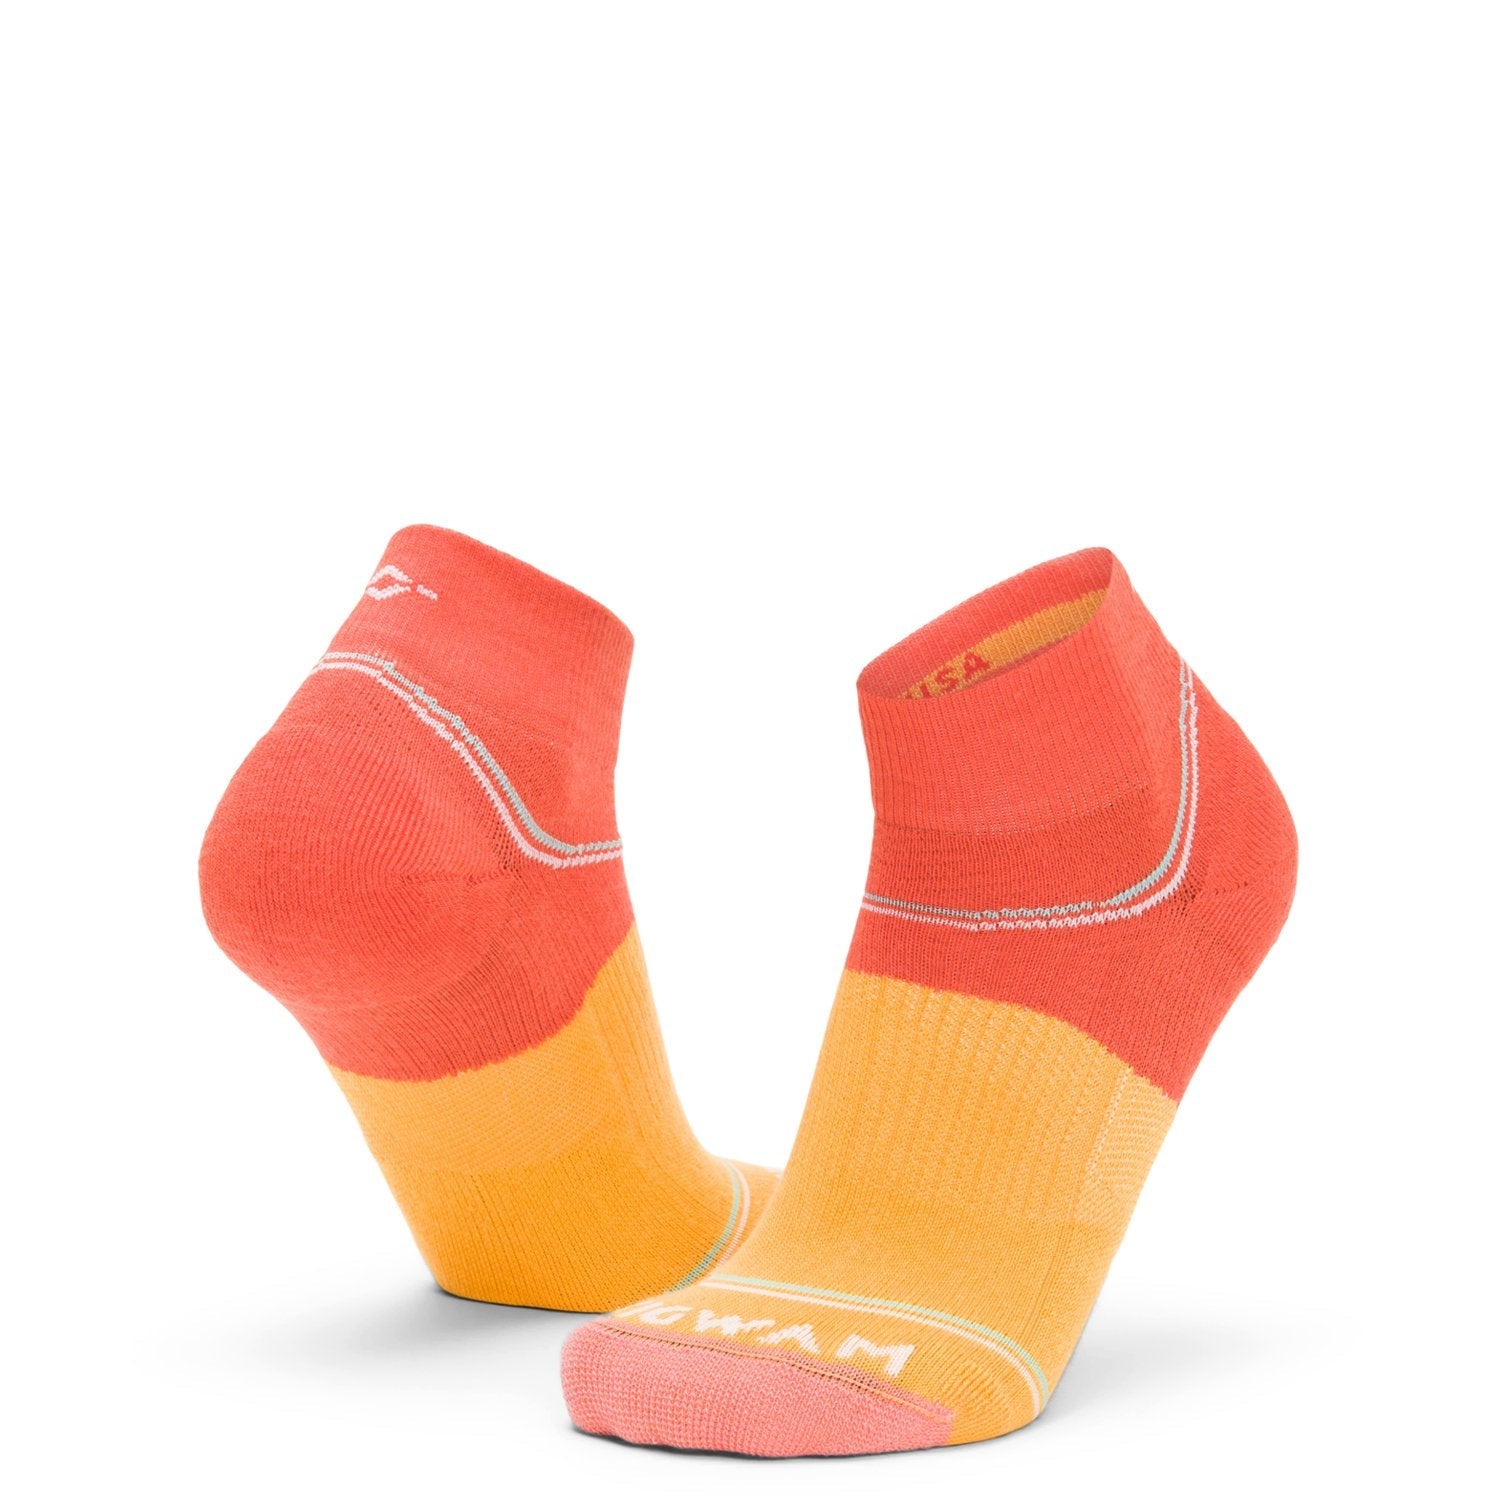 Surpass Lightweight Quarter Sock - Red/Orange full product perspective - made in The USA Wigwam Socks